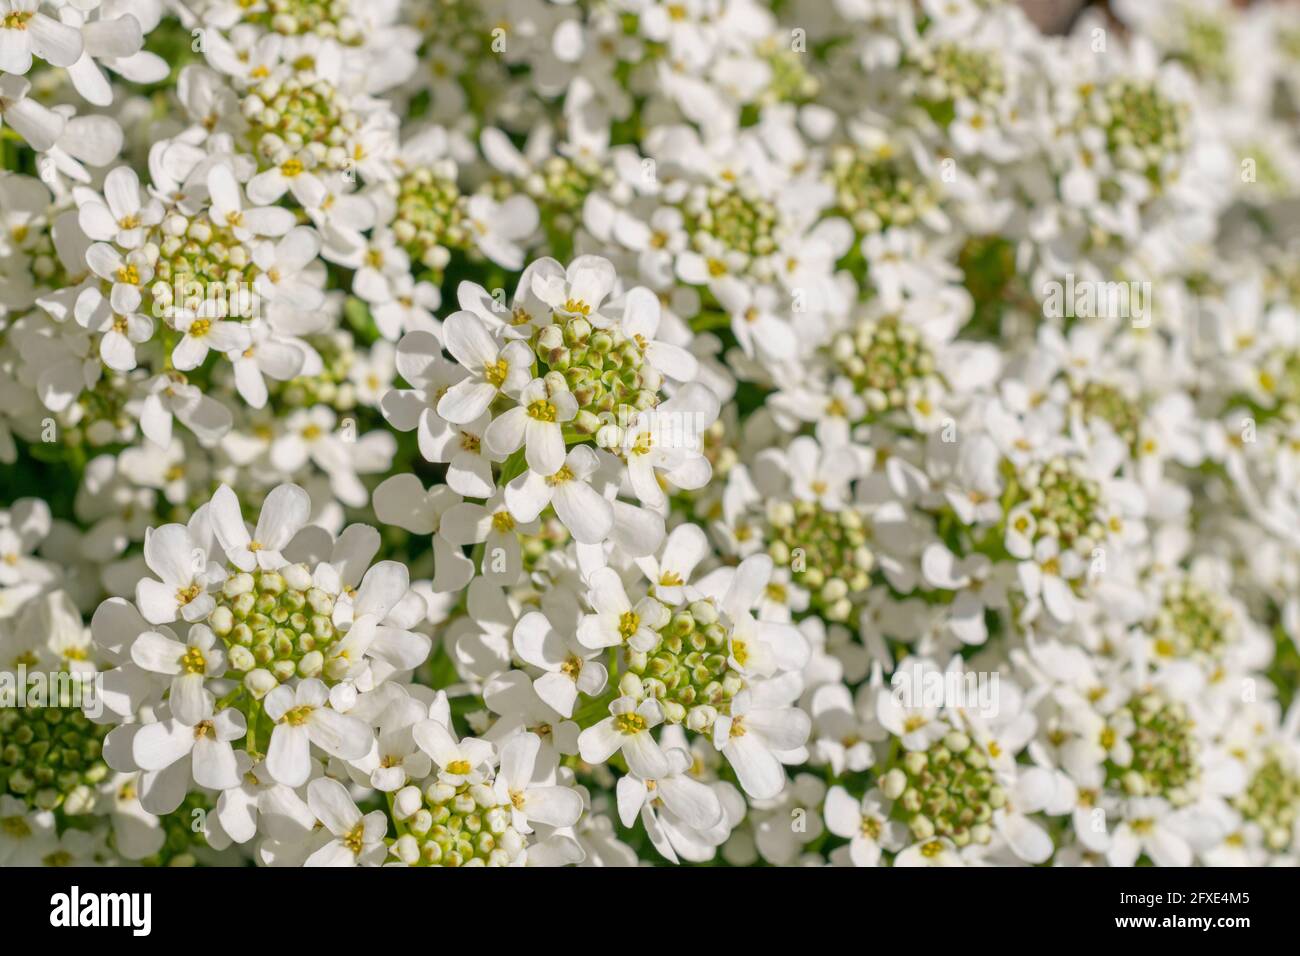 Evergreen Candytuft (Iberis sempervirens) blooms brilliant white on a sunny day. This hardy perennial has cheerful white flowers. Stock Photo